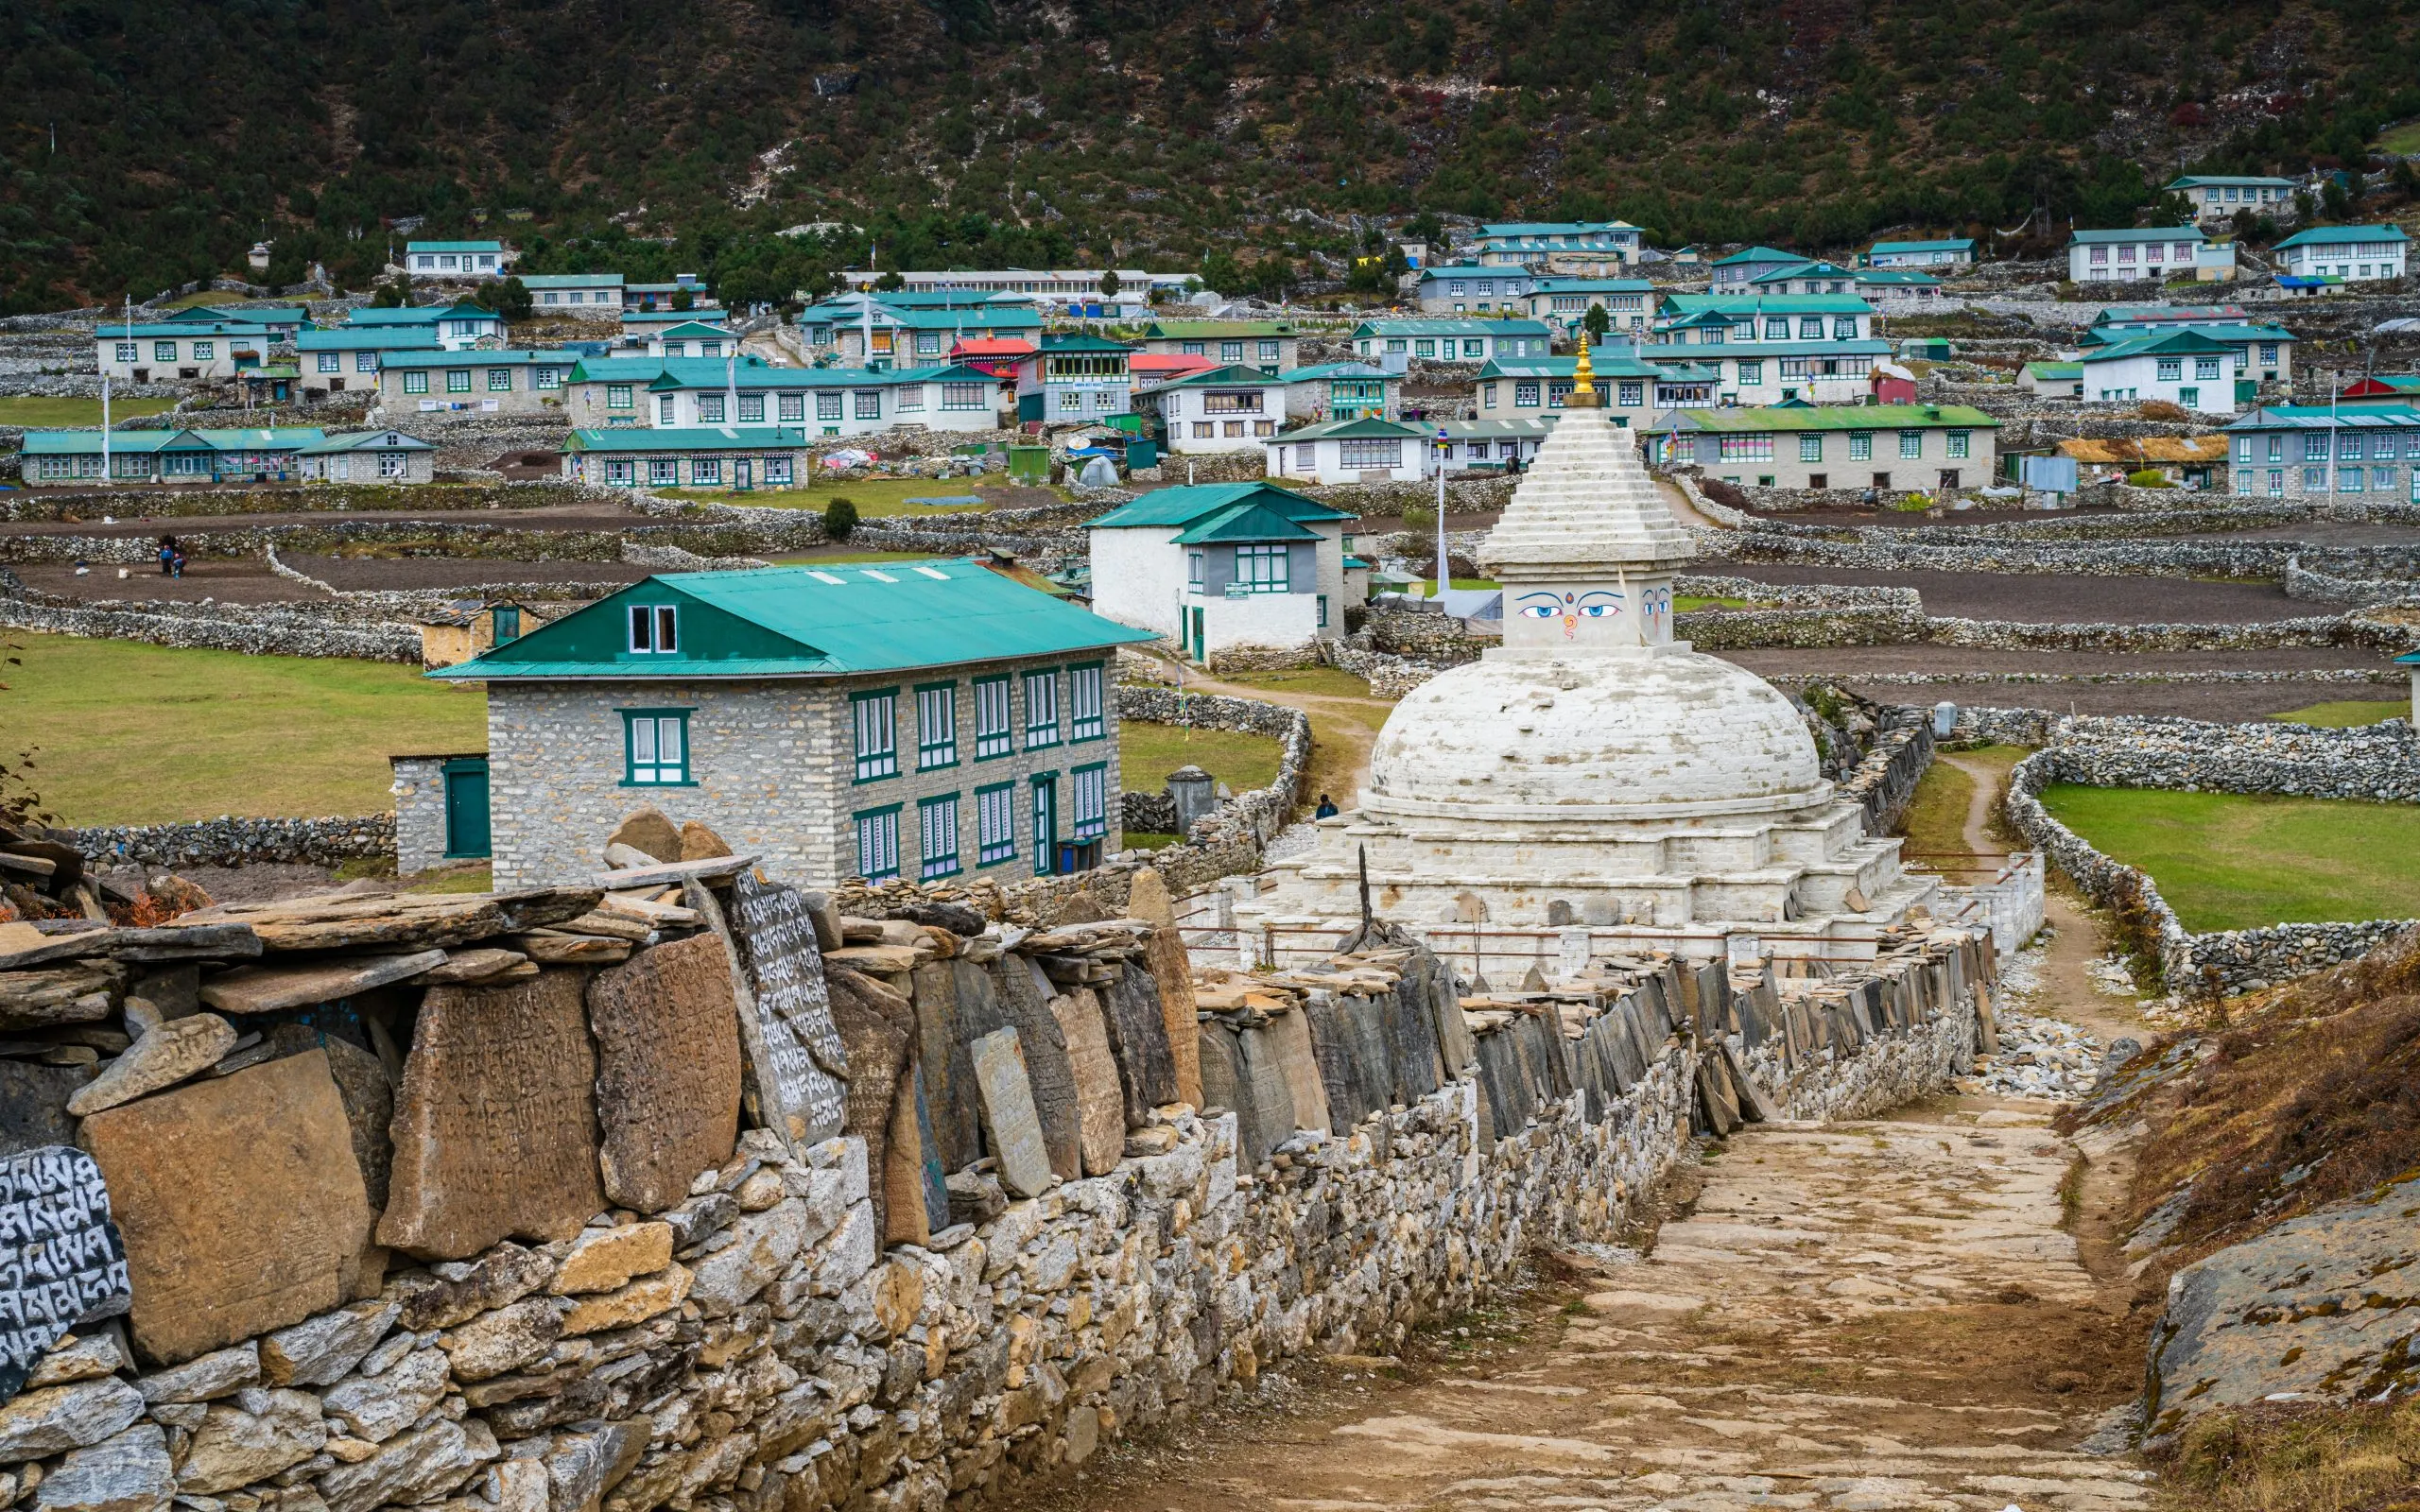 Stupa at the entry point of Khunde village